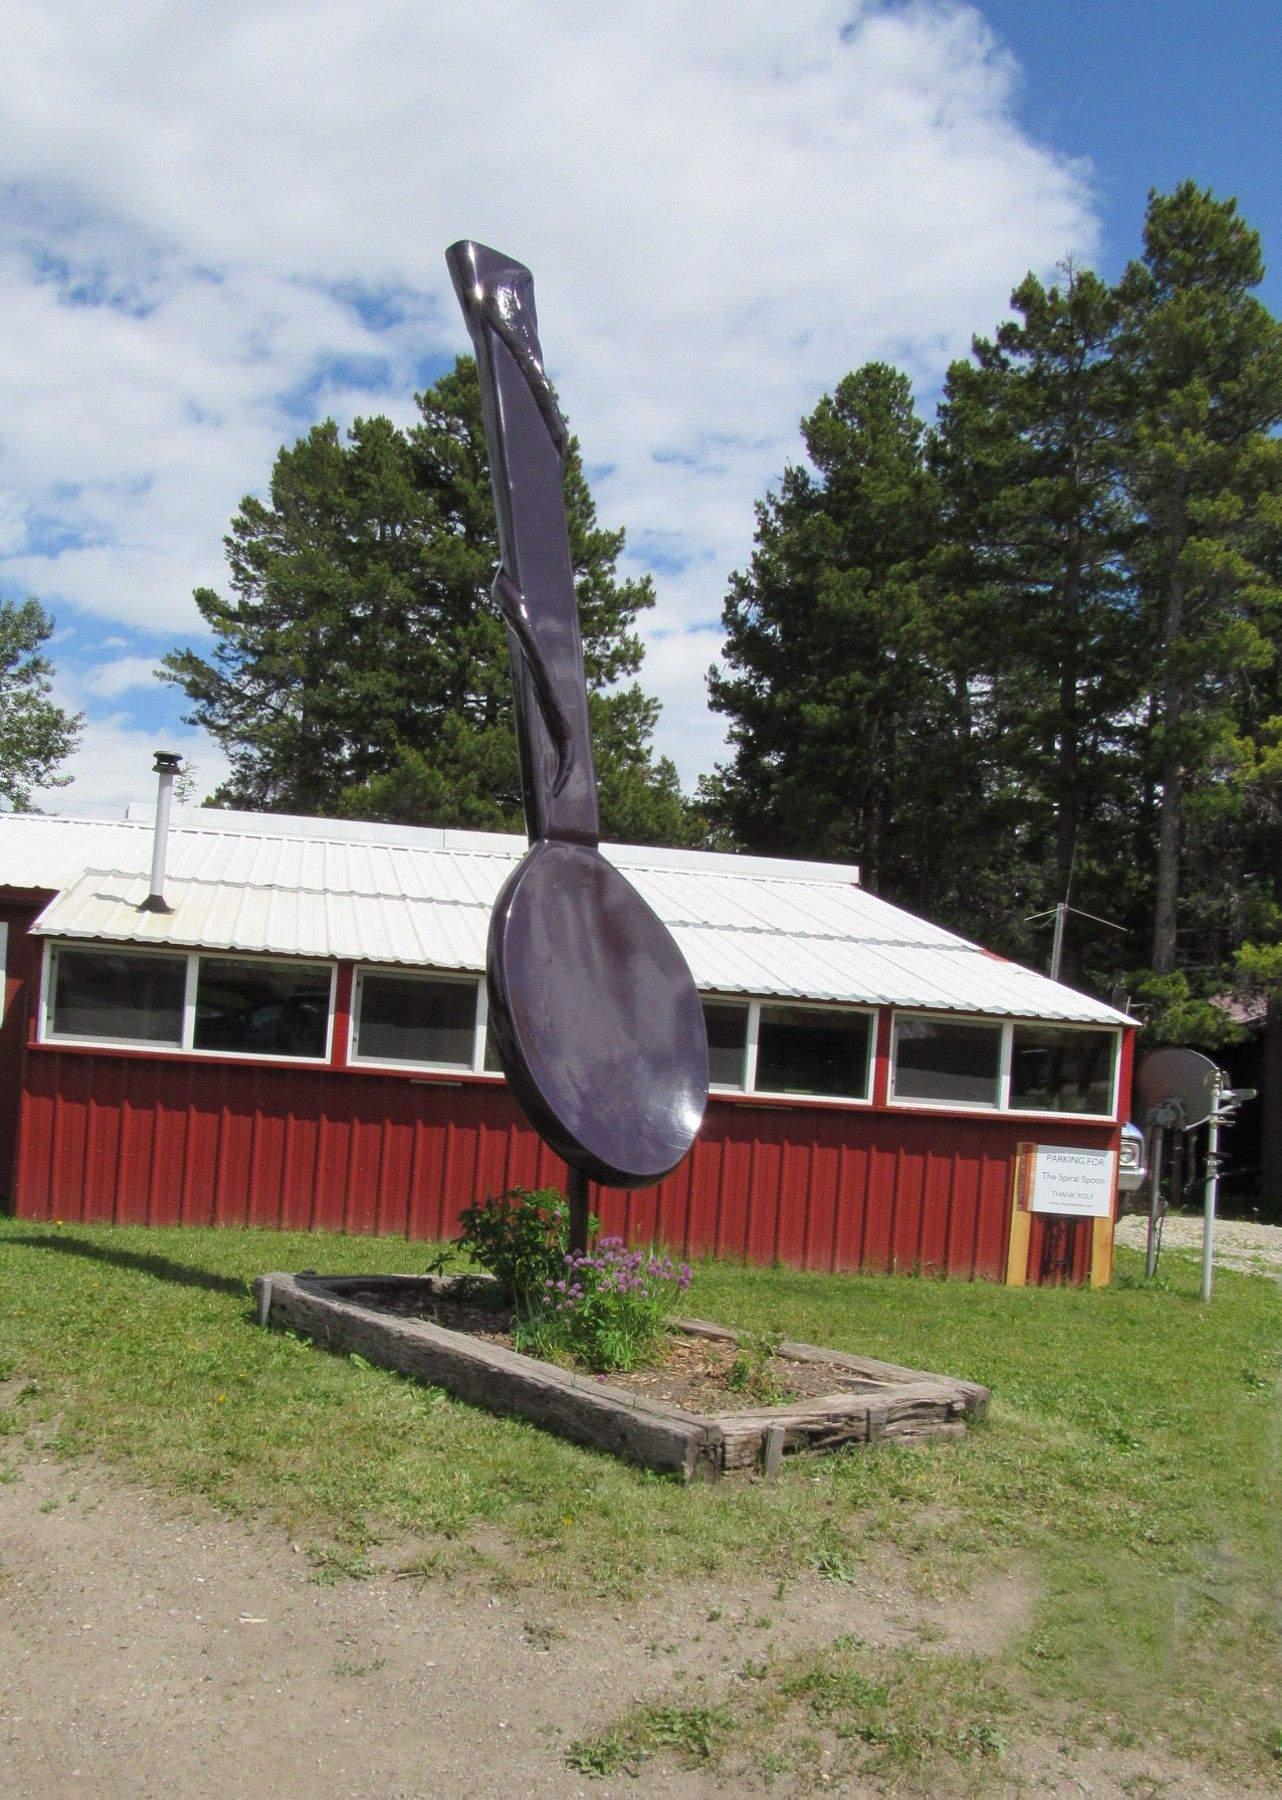 World's Largest Purple Spoon, world record in East Glacier Park, Montana